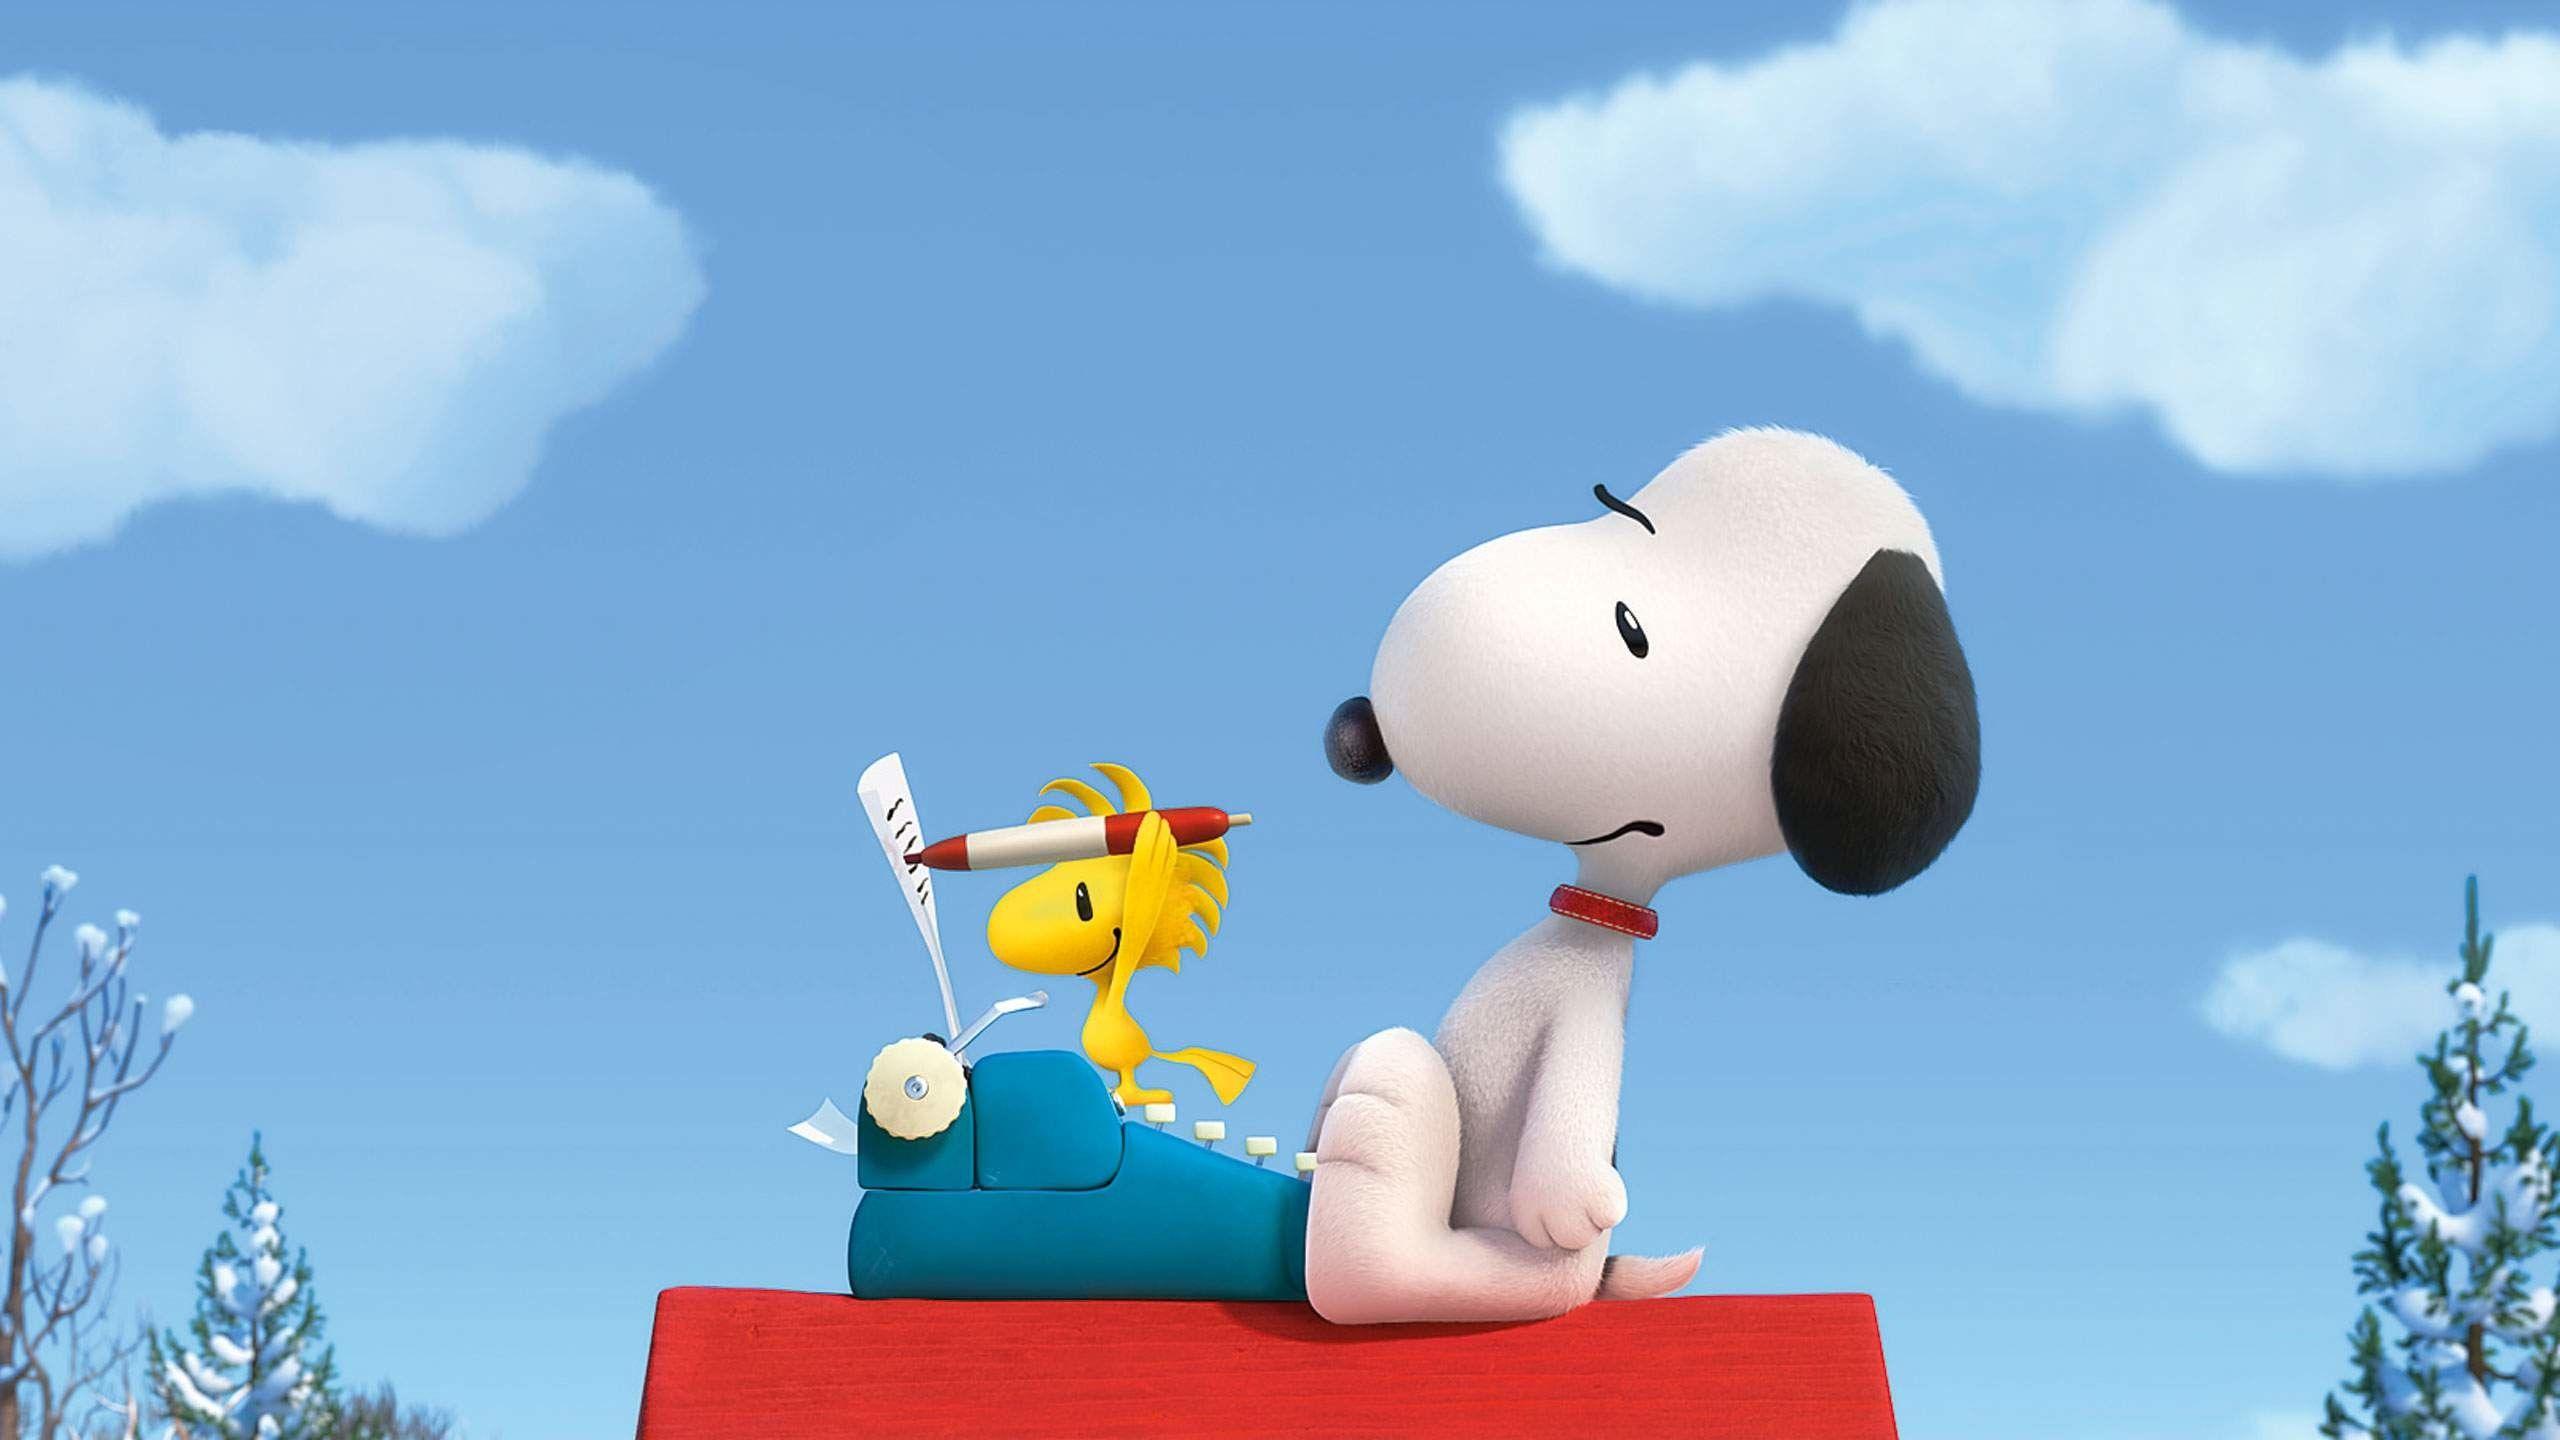 1280x960 I made this minimalist Peanuts wallpaper with Snoopy and  Schroeder Hope you like it  rwallpapers